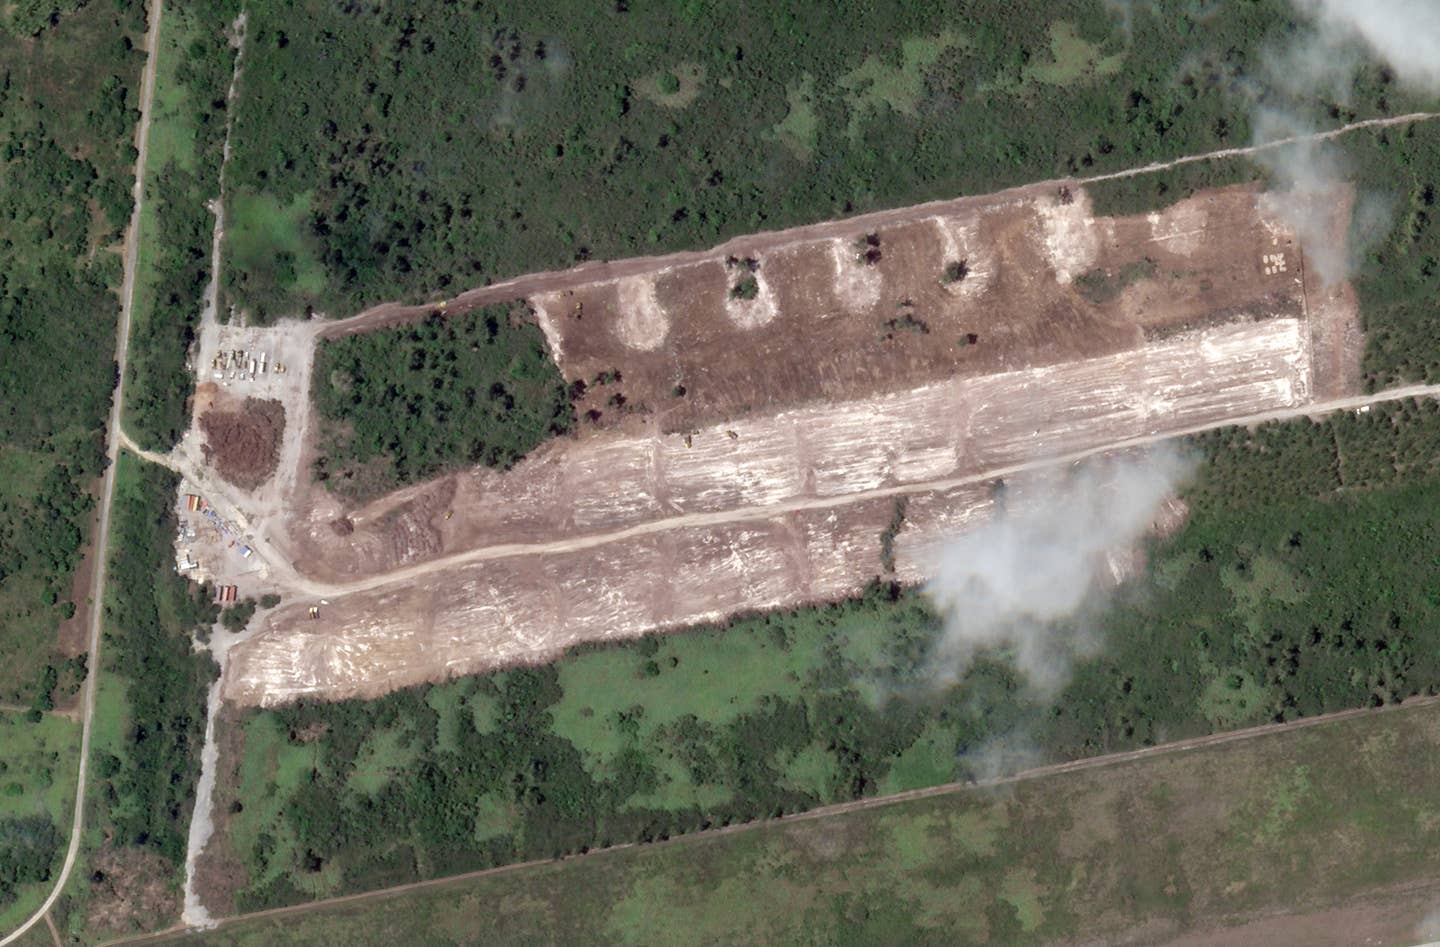 A close-up of the construction area at Tinian International Airport. PHOTO © 2022 PLANET LABS INC. ALL RIGHTS RESERVED. REPRINTED BY PERMISSION